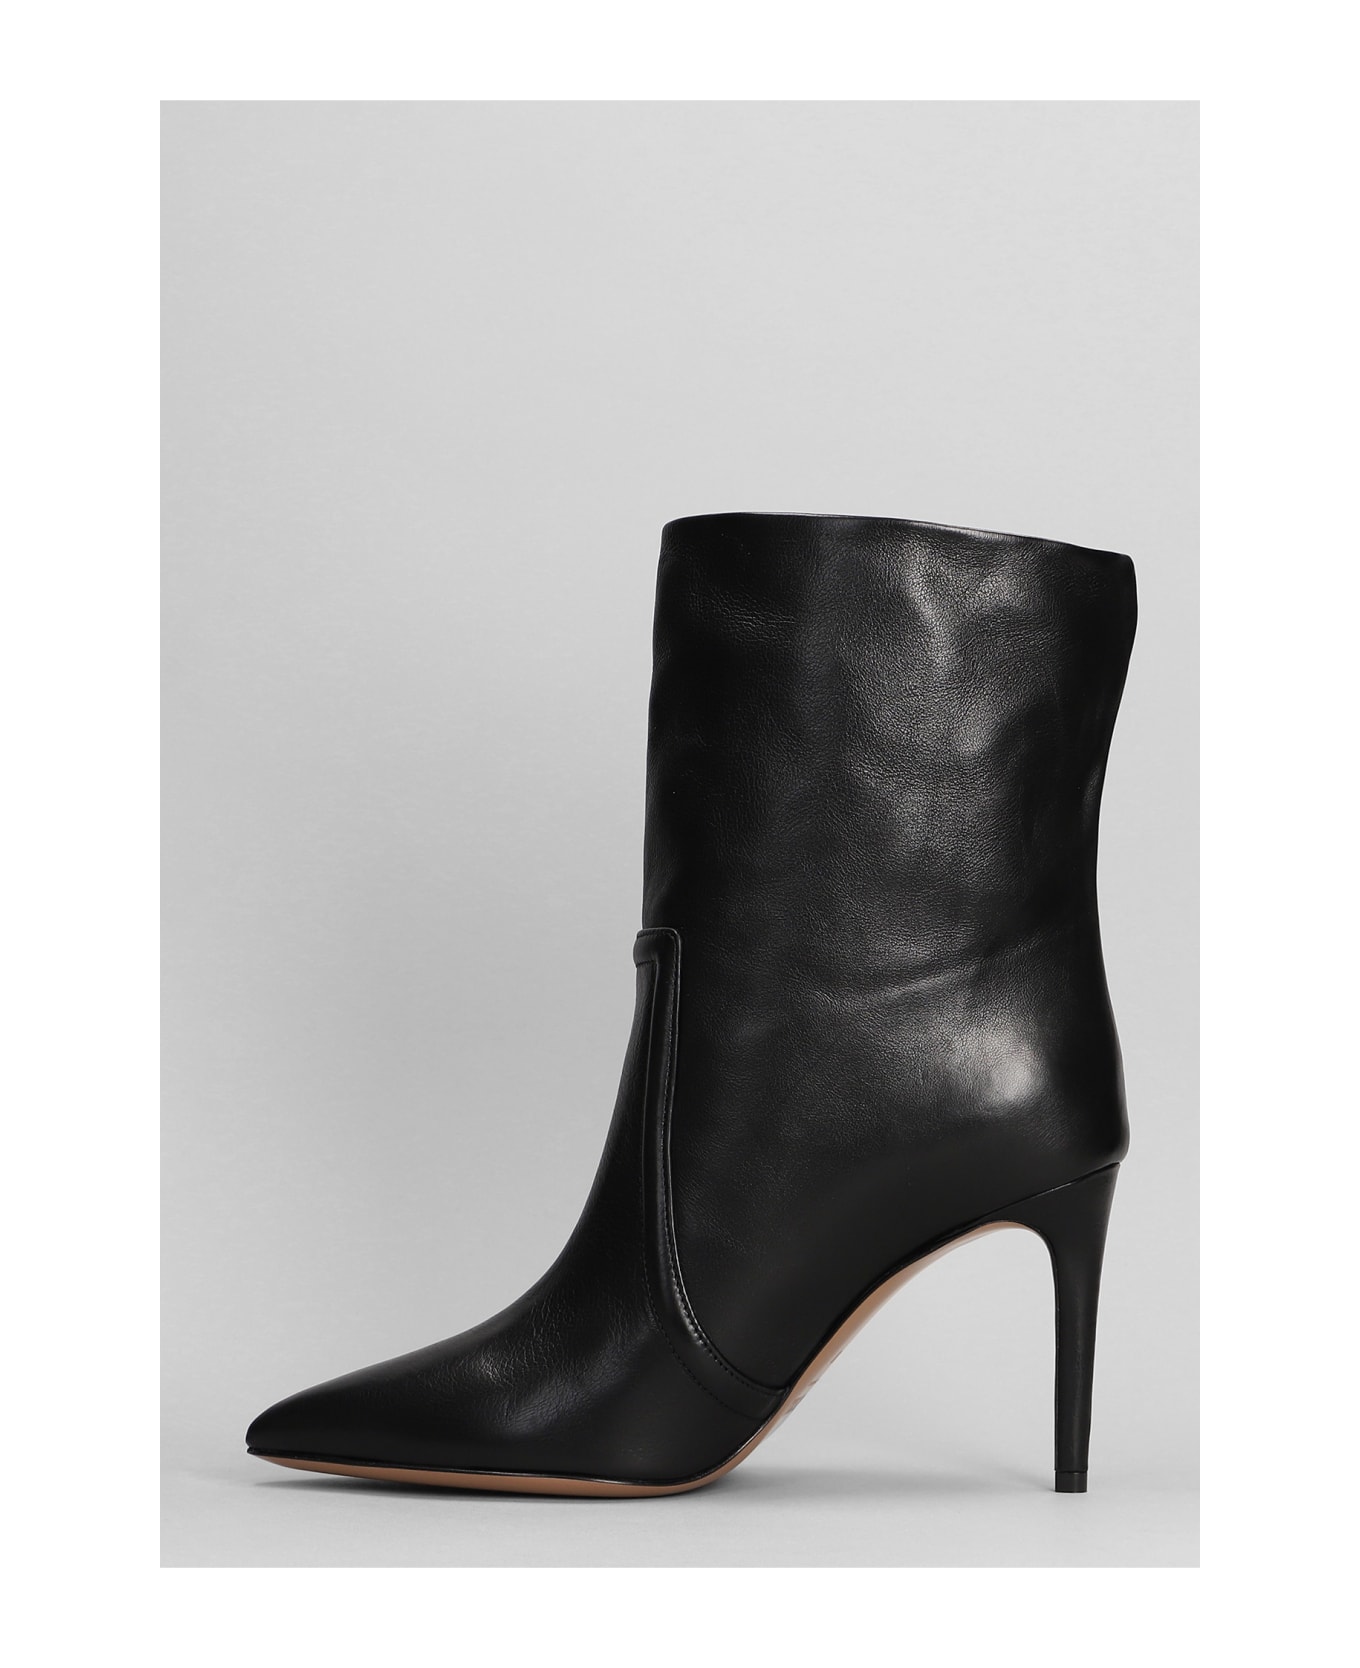 Paris Texas High Heels Ankle Boots In Black Leather - black